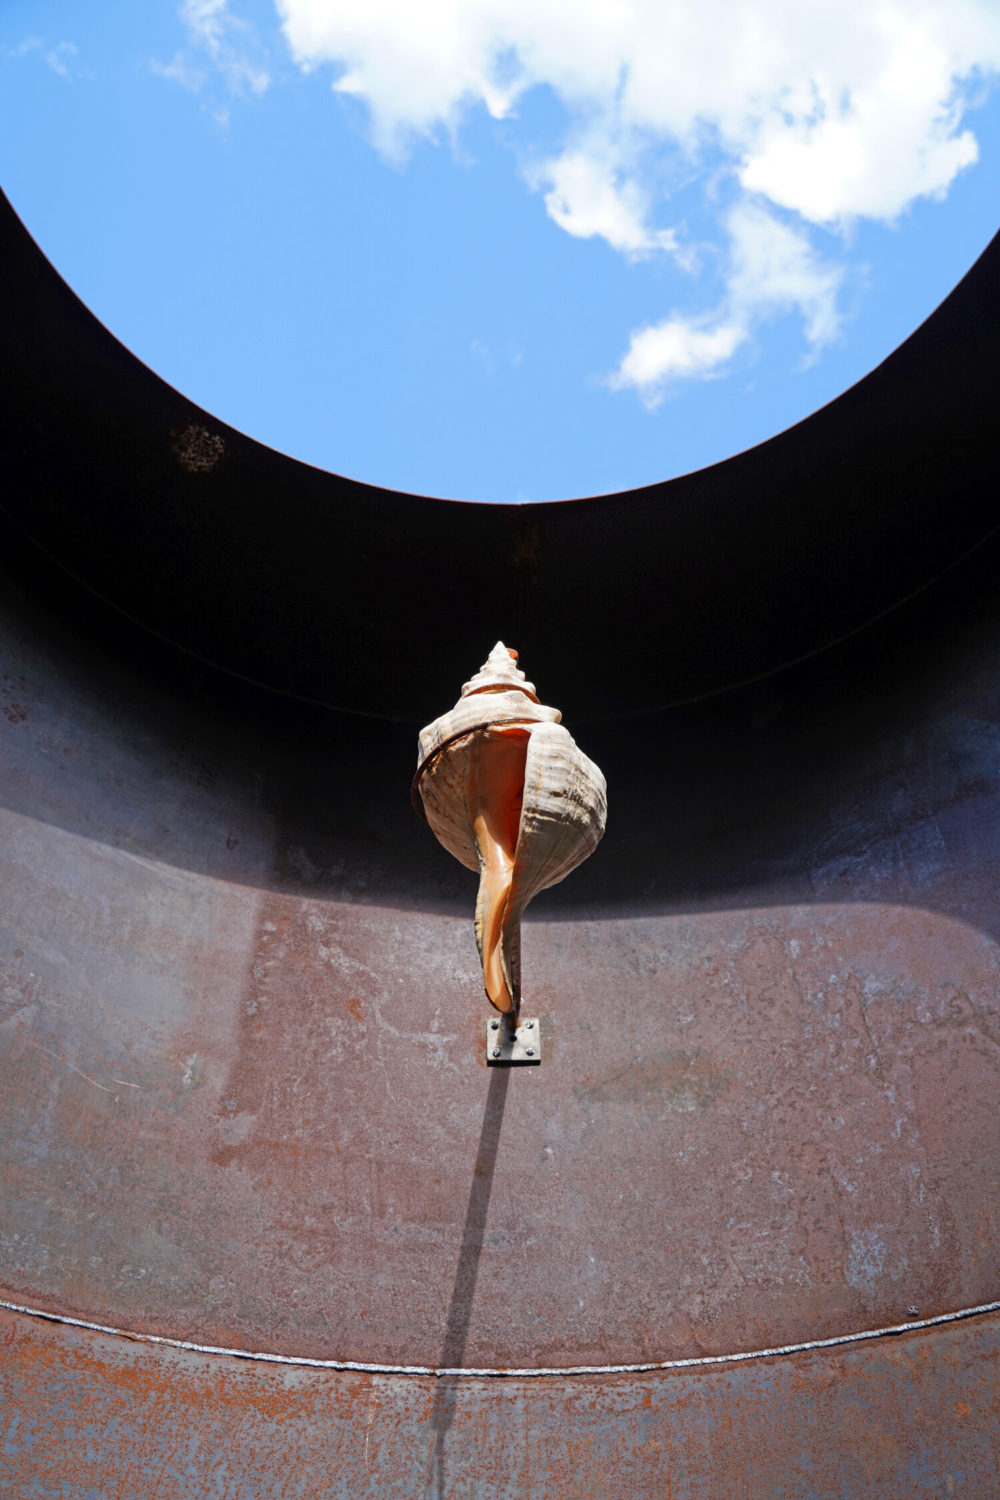 Pink shell appears to be floating in a steel chamber with blue sky in the background